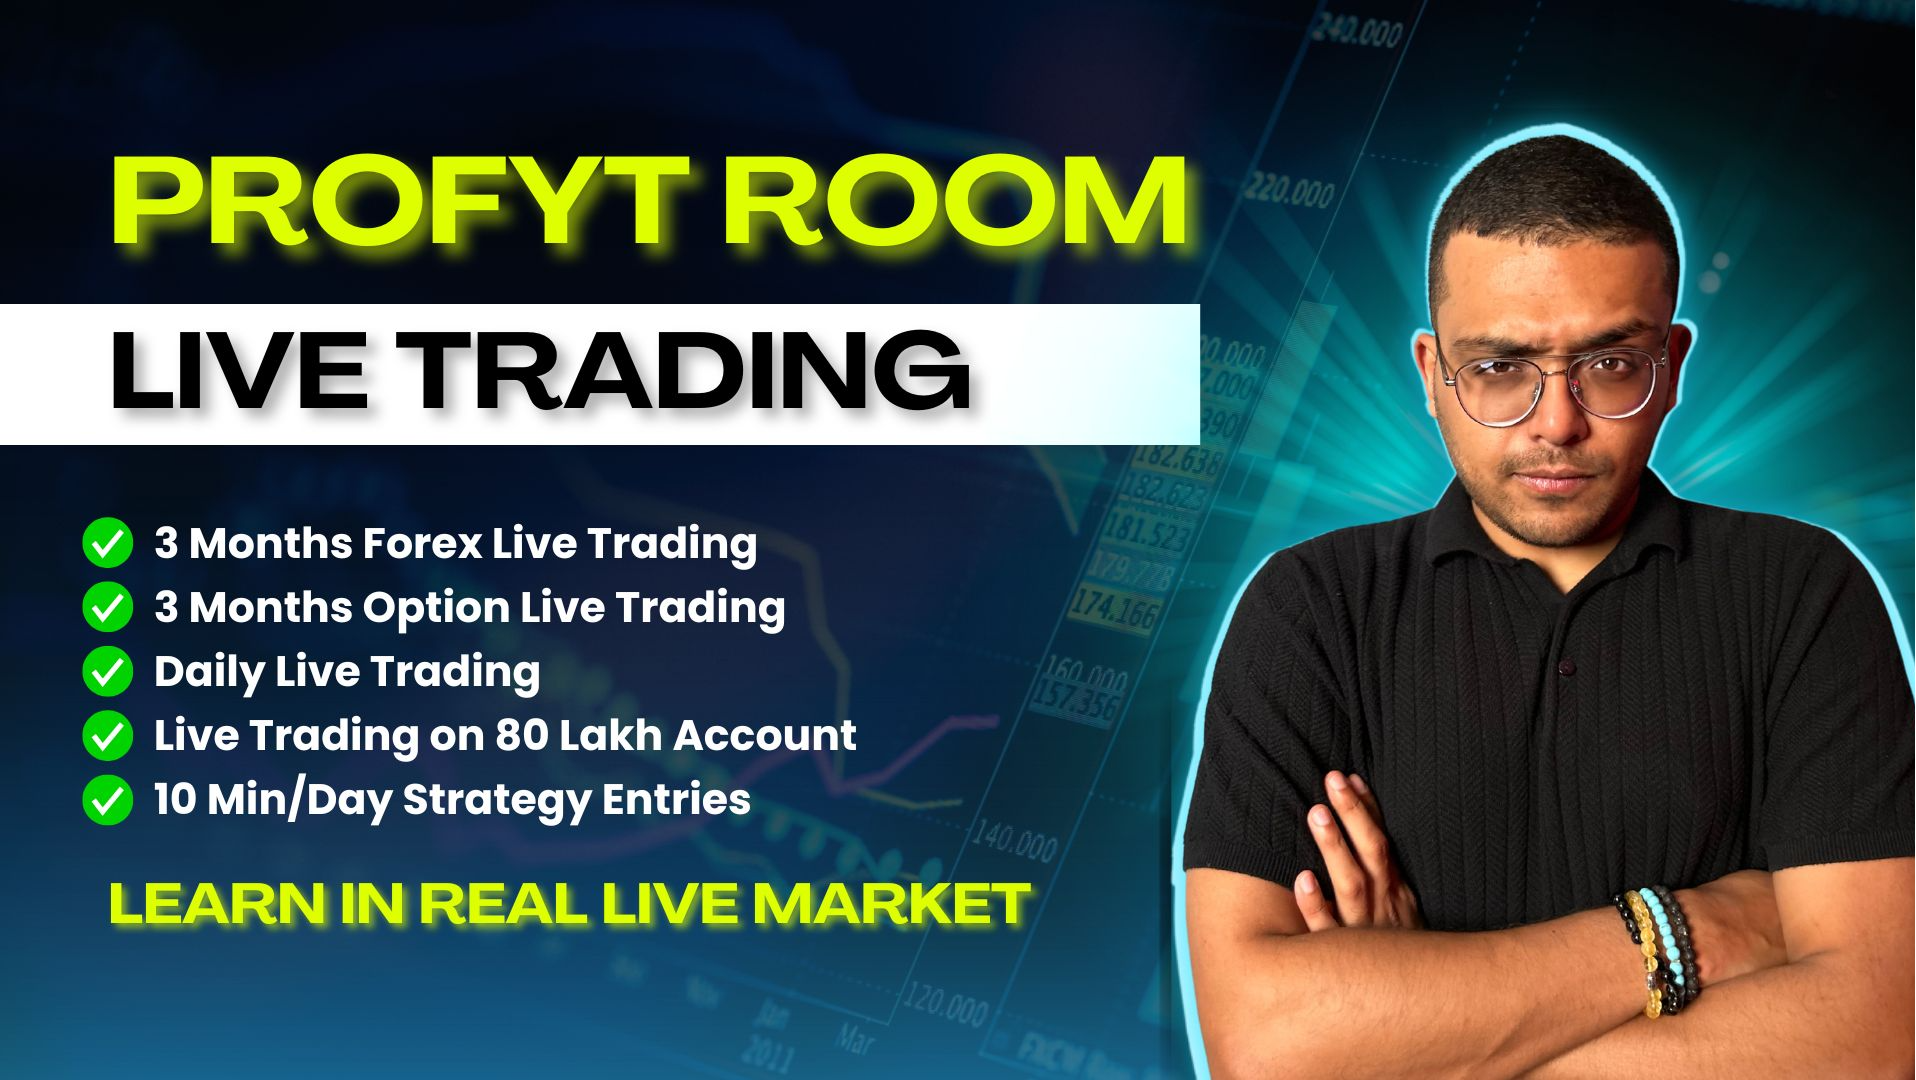 Live Trading Options : Profyt Room (May/June)